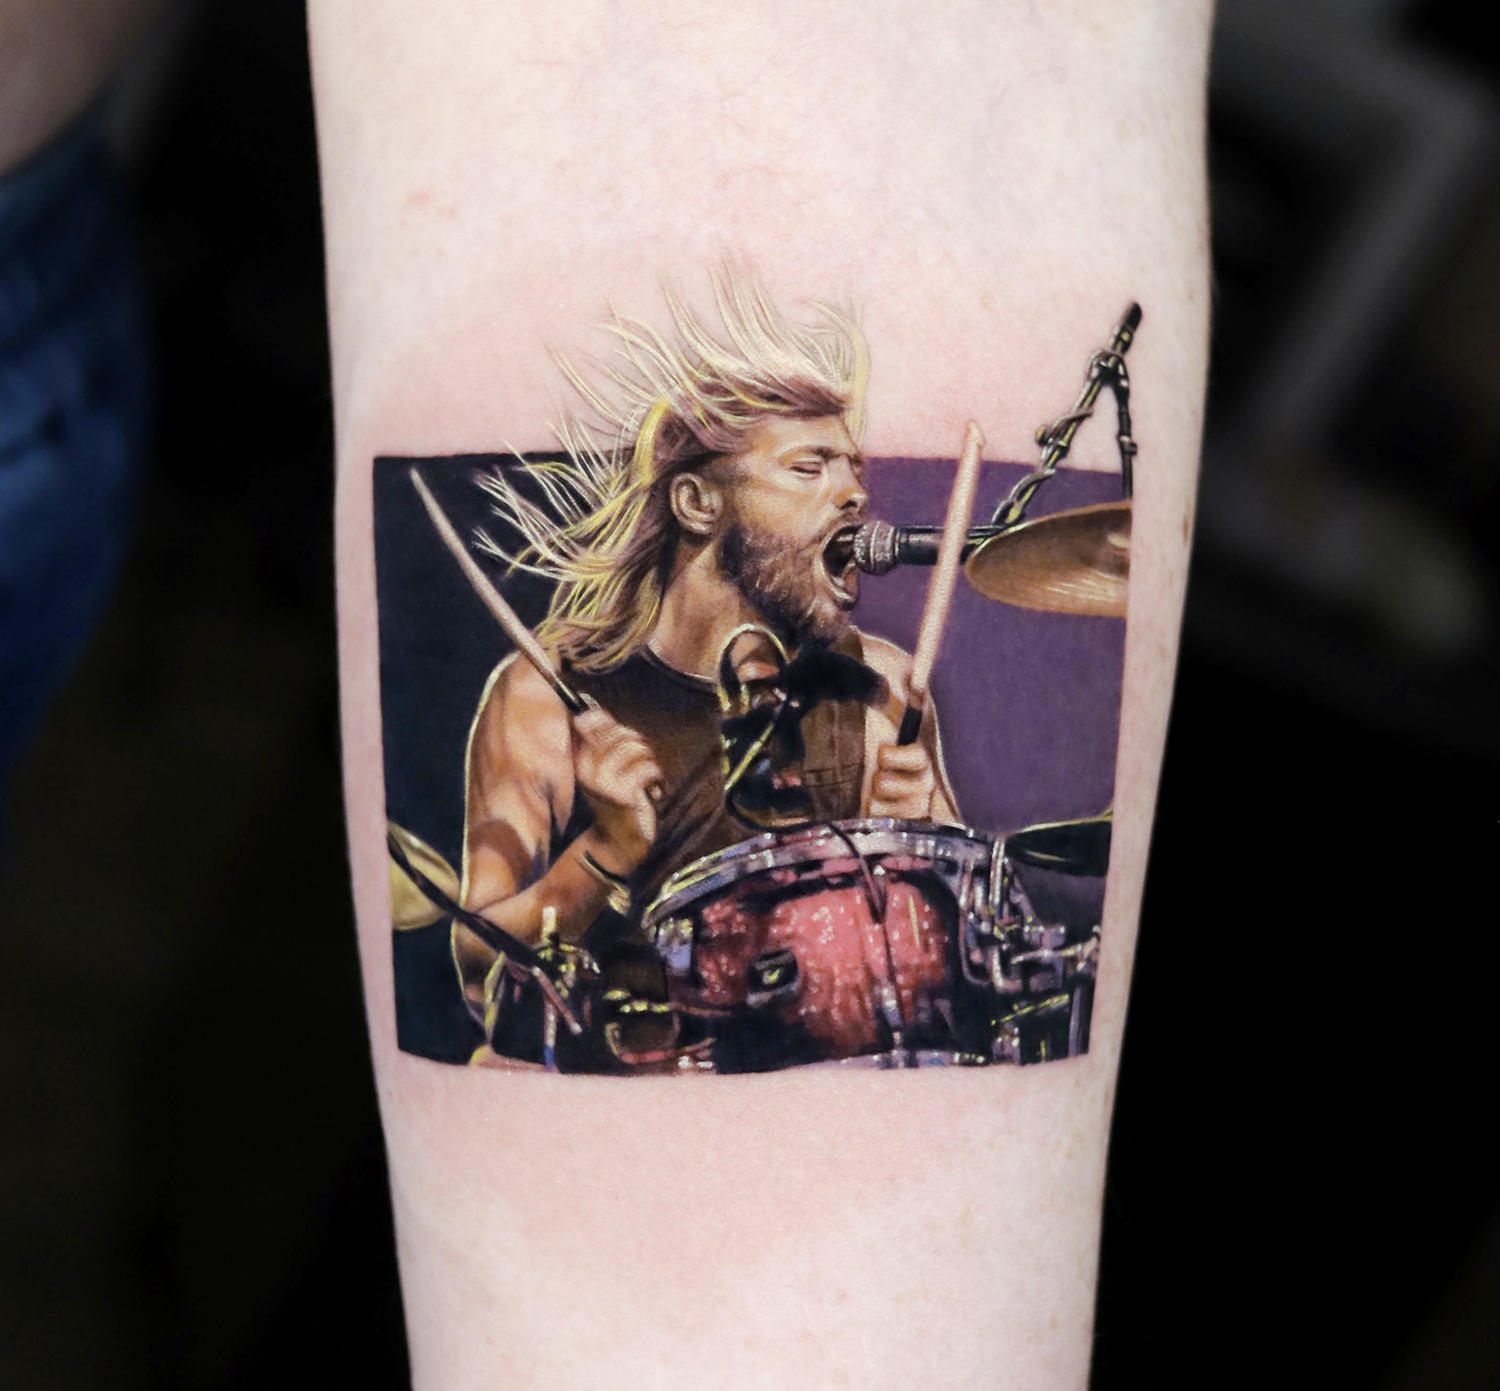 A memorial tattoo for the late percussionist Taylor Hawkings